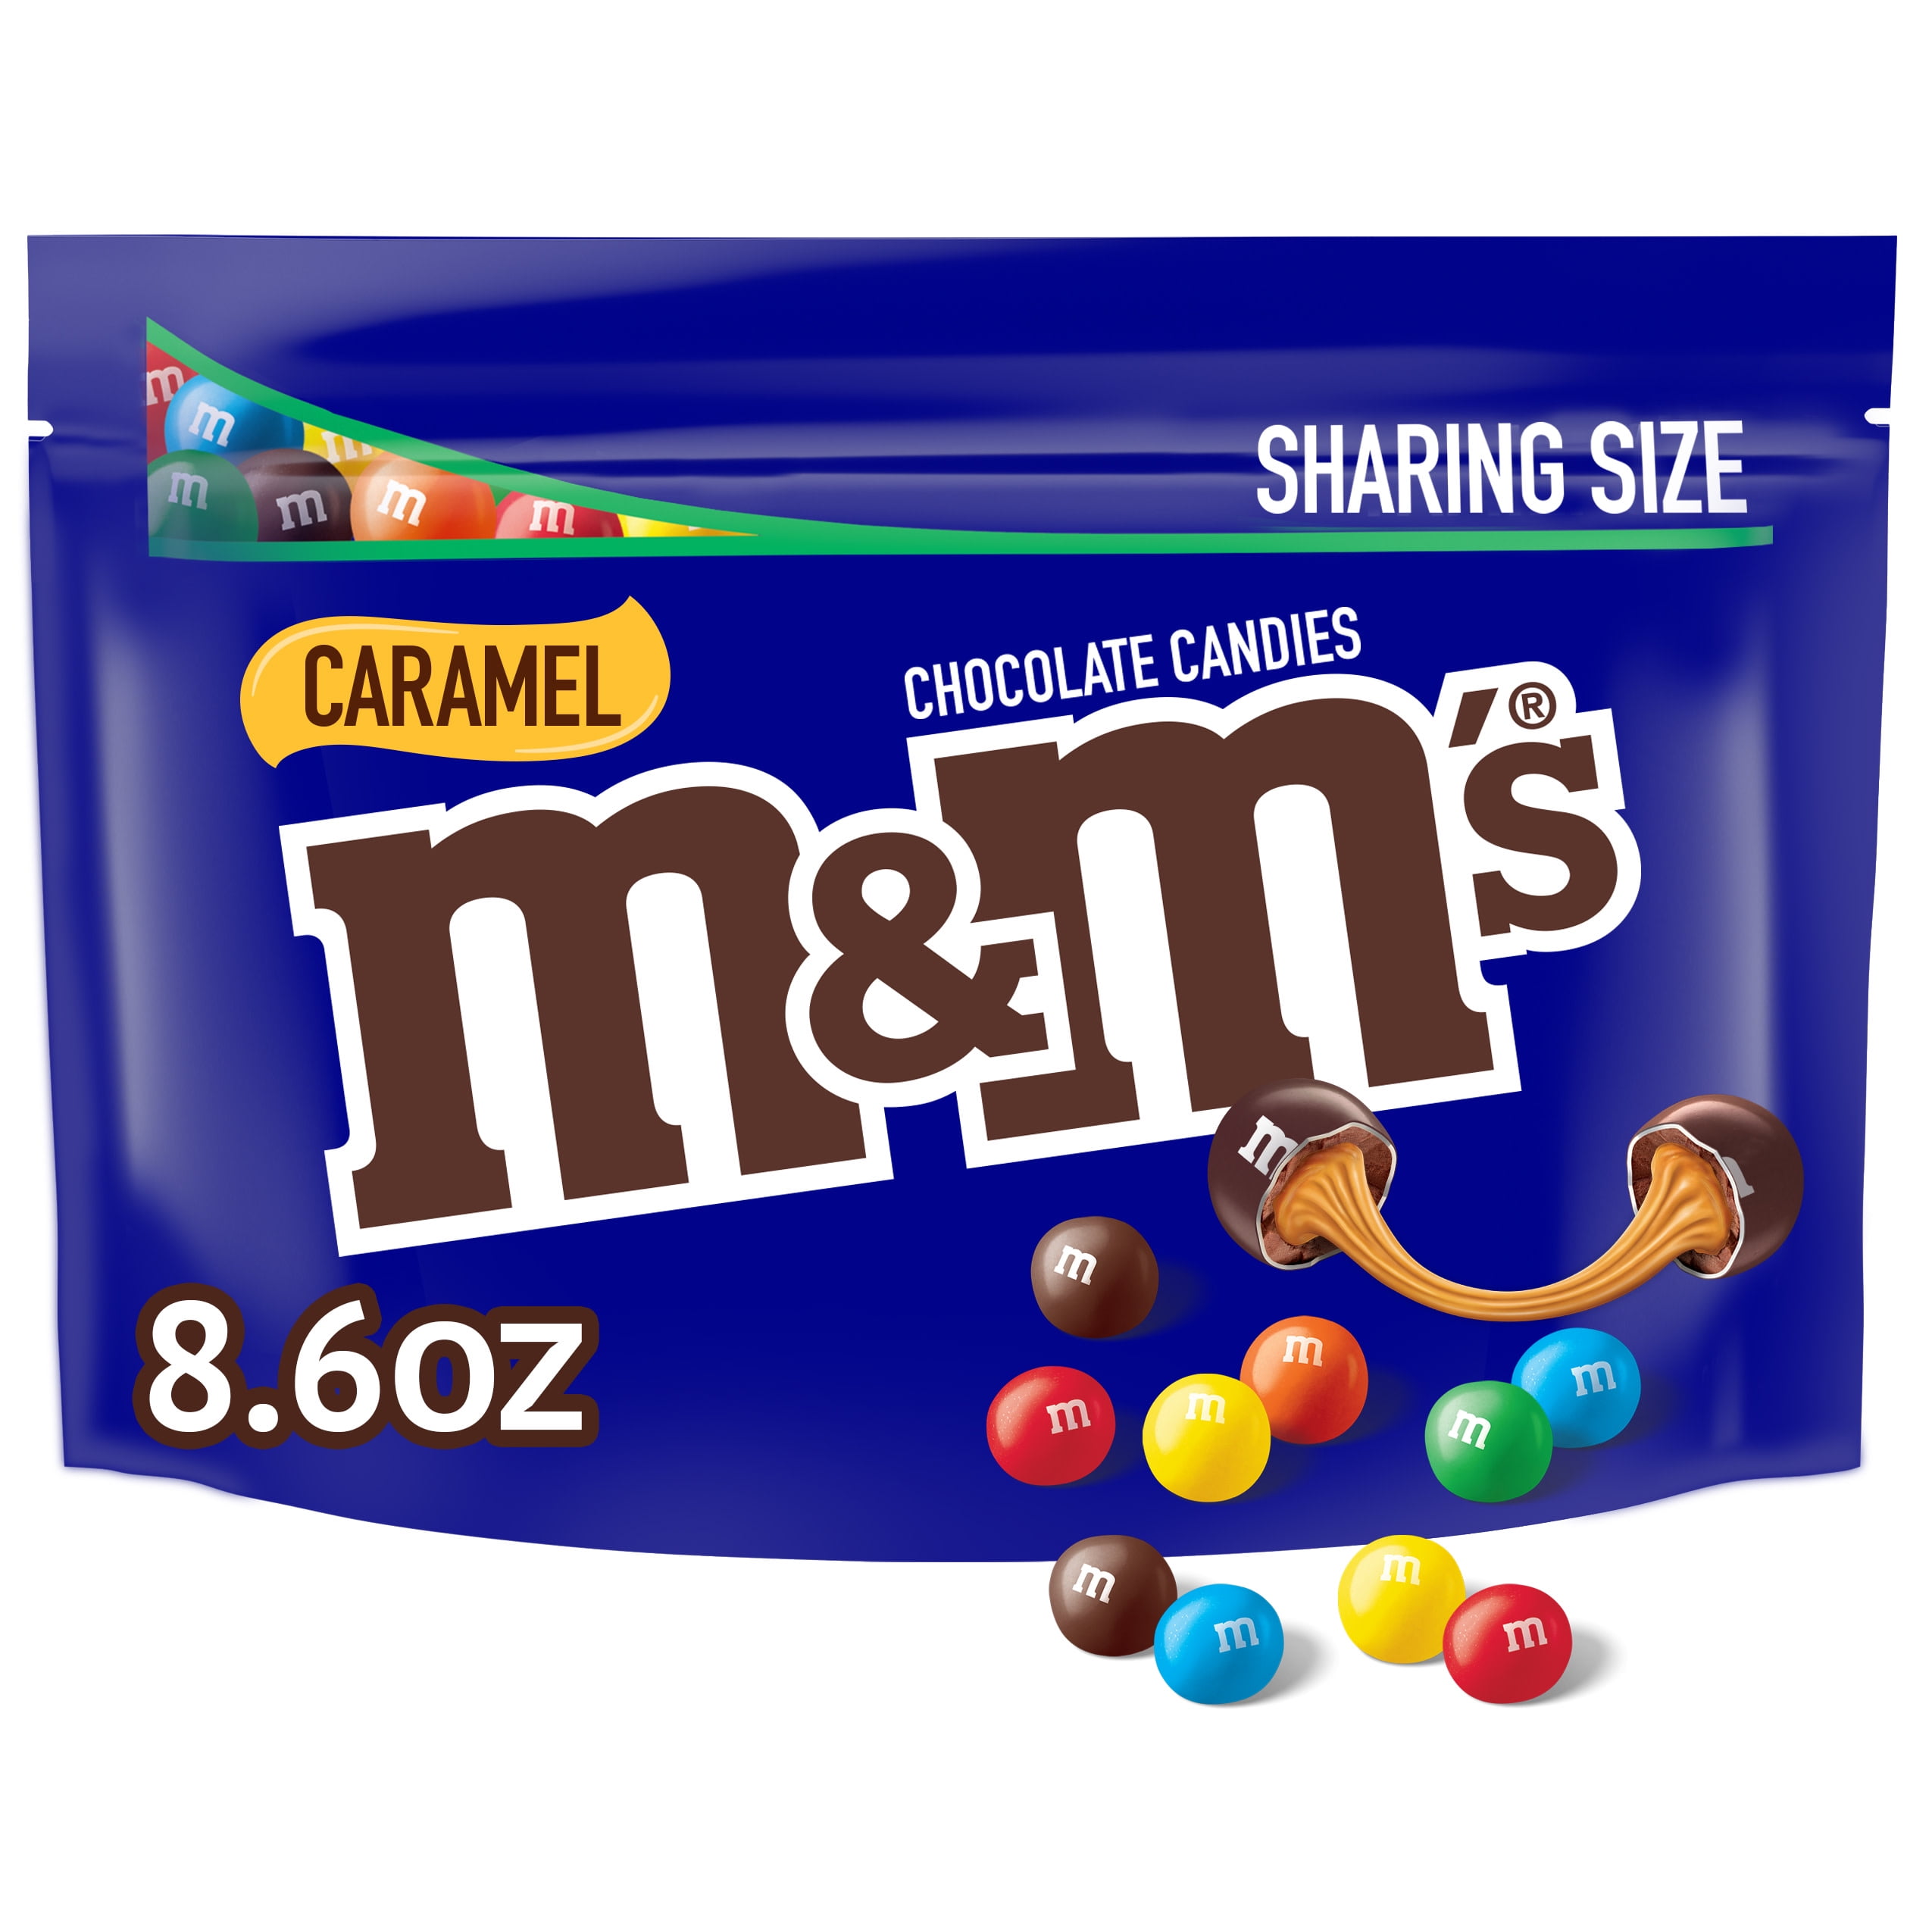 3) Bags Of Caramel M&M's Chocolate Candies 2.83 Oz Share Size *